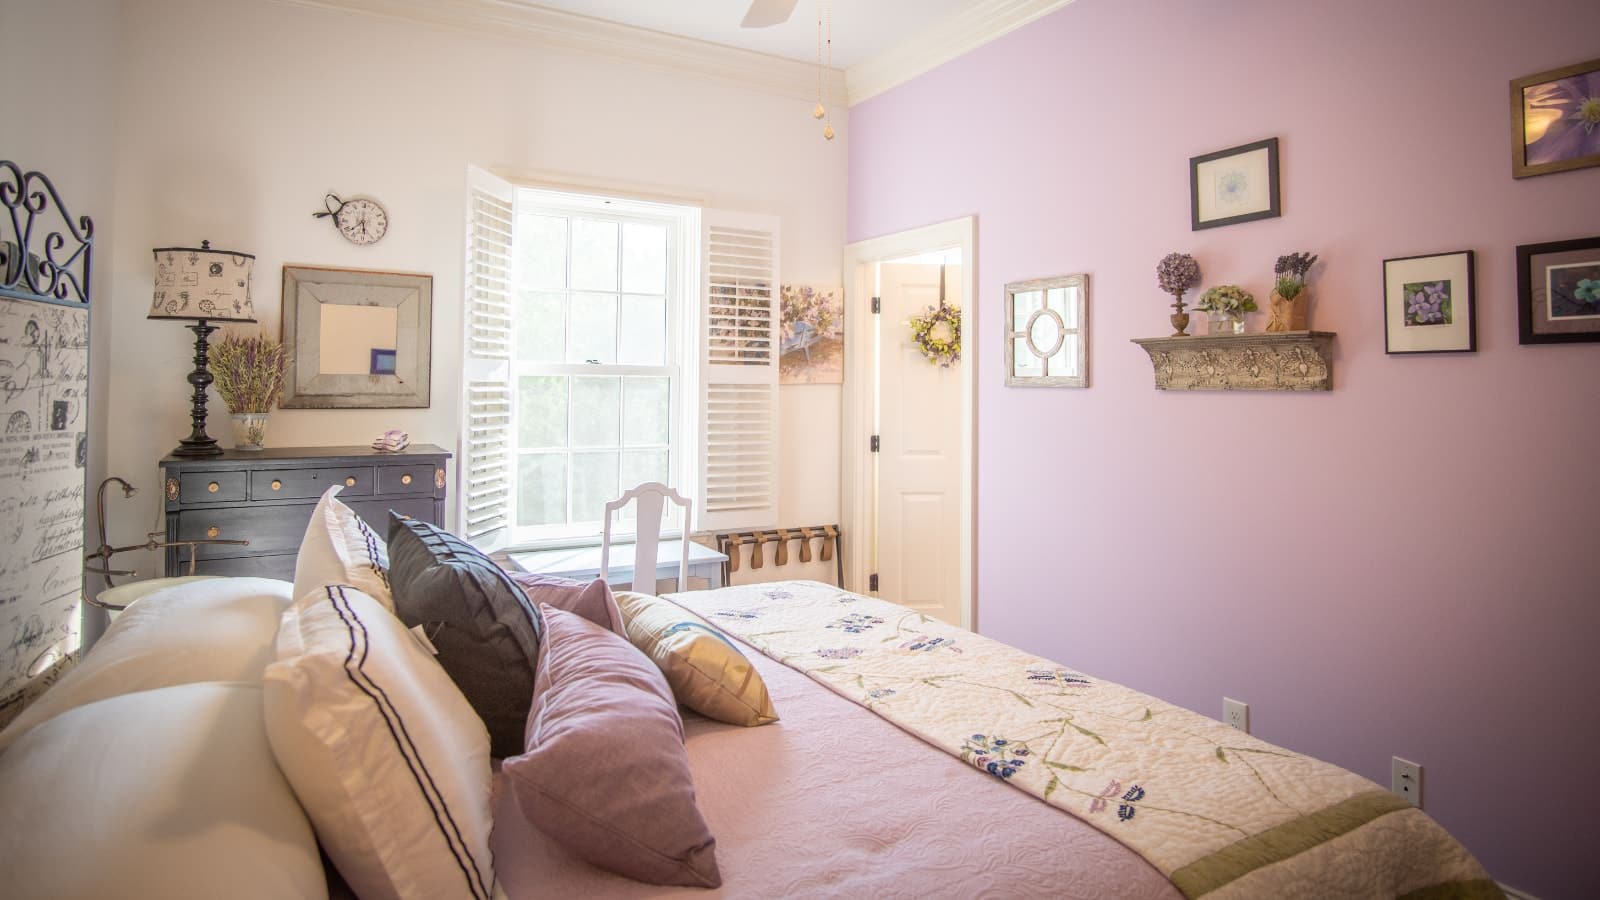 Bedroom with light purple and white walls, antique headboard, light purple bedding, dark wooden dresser, and white desk and chair